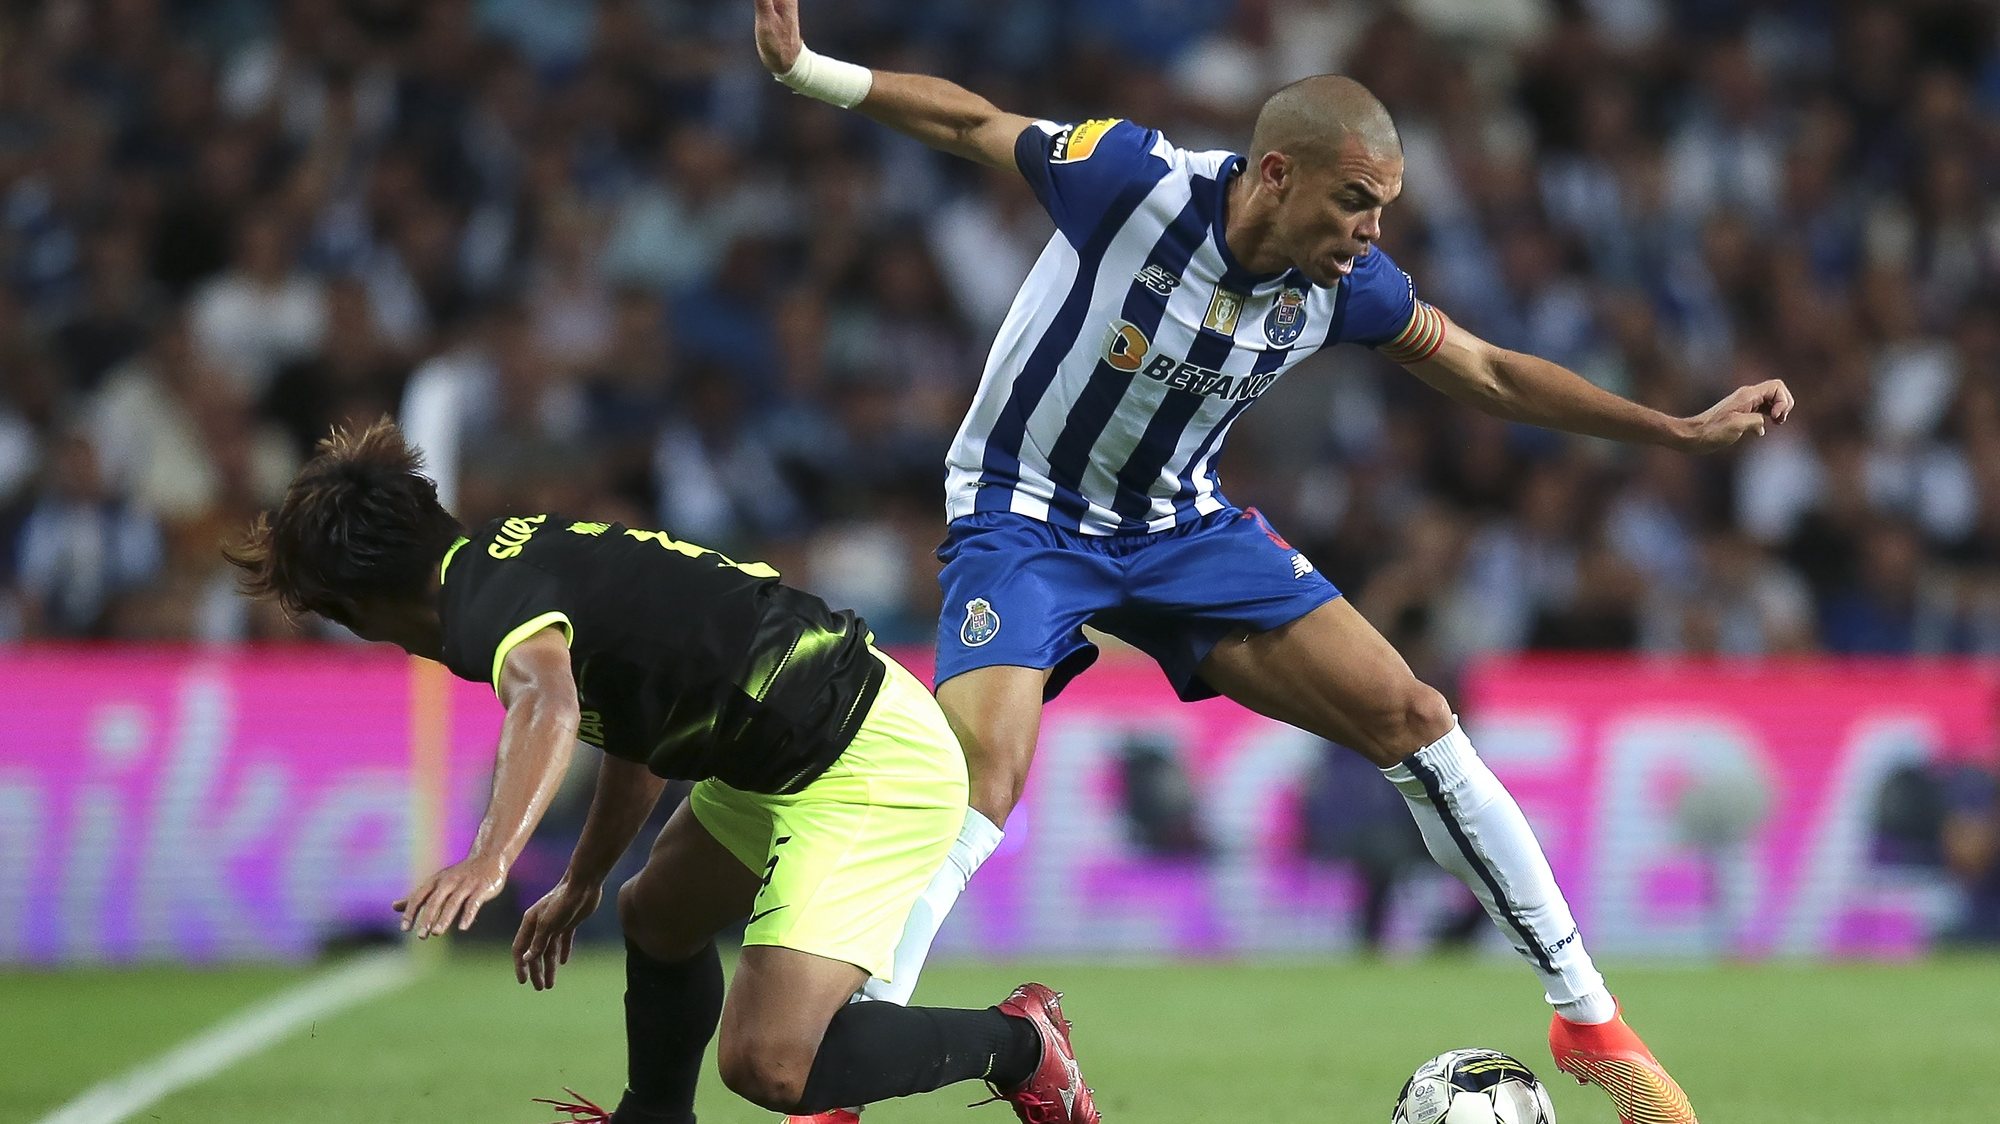 FC Porto&#039;s Pepe (R) fights for the ball with Sporting’s Hidemasa Morita (L) during the Portuguese First League soccer match, between FC Porto and Sporting, at Dragao Stadium in Porto, Portugal, 20 August 2022. MANUEL FERNANDO ARAUJO/LUSA